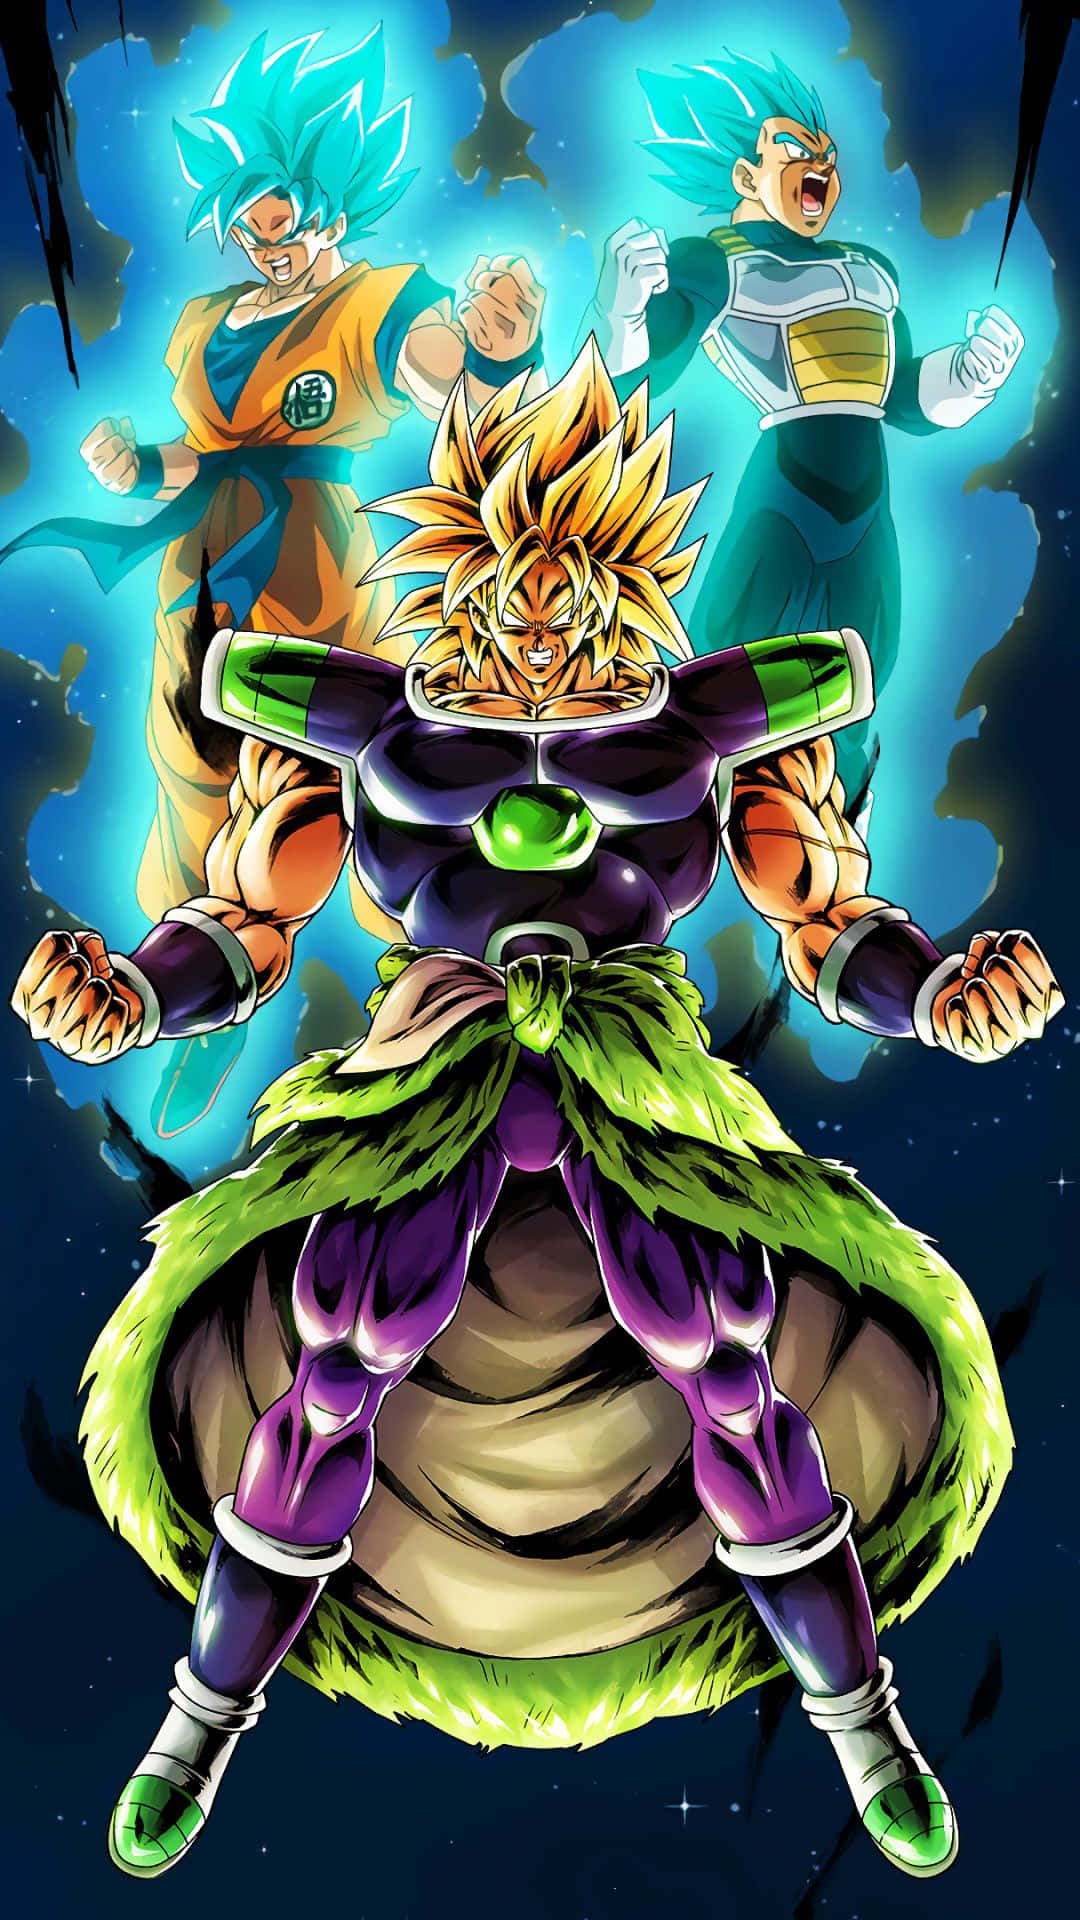 Caption: The True Power Unleashed - Broly In Dragon Ball Super